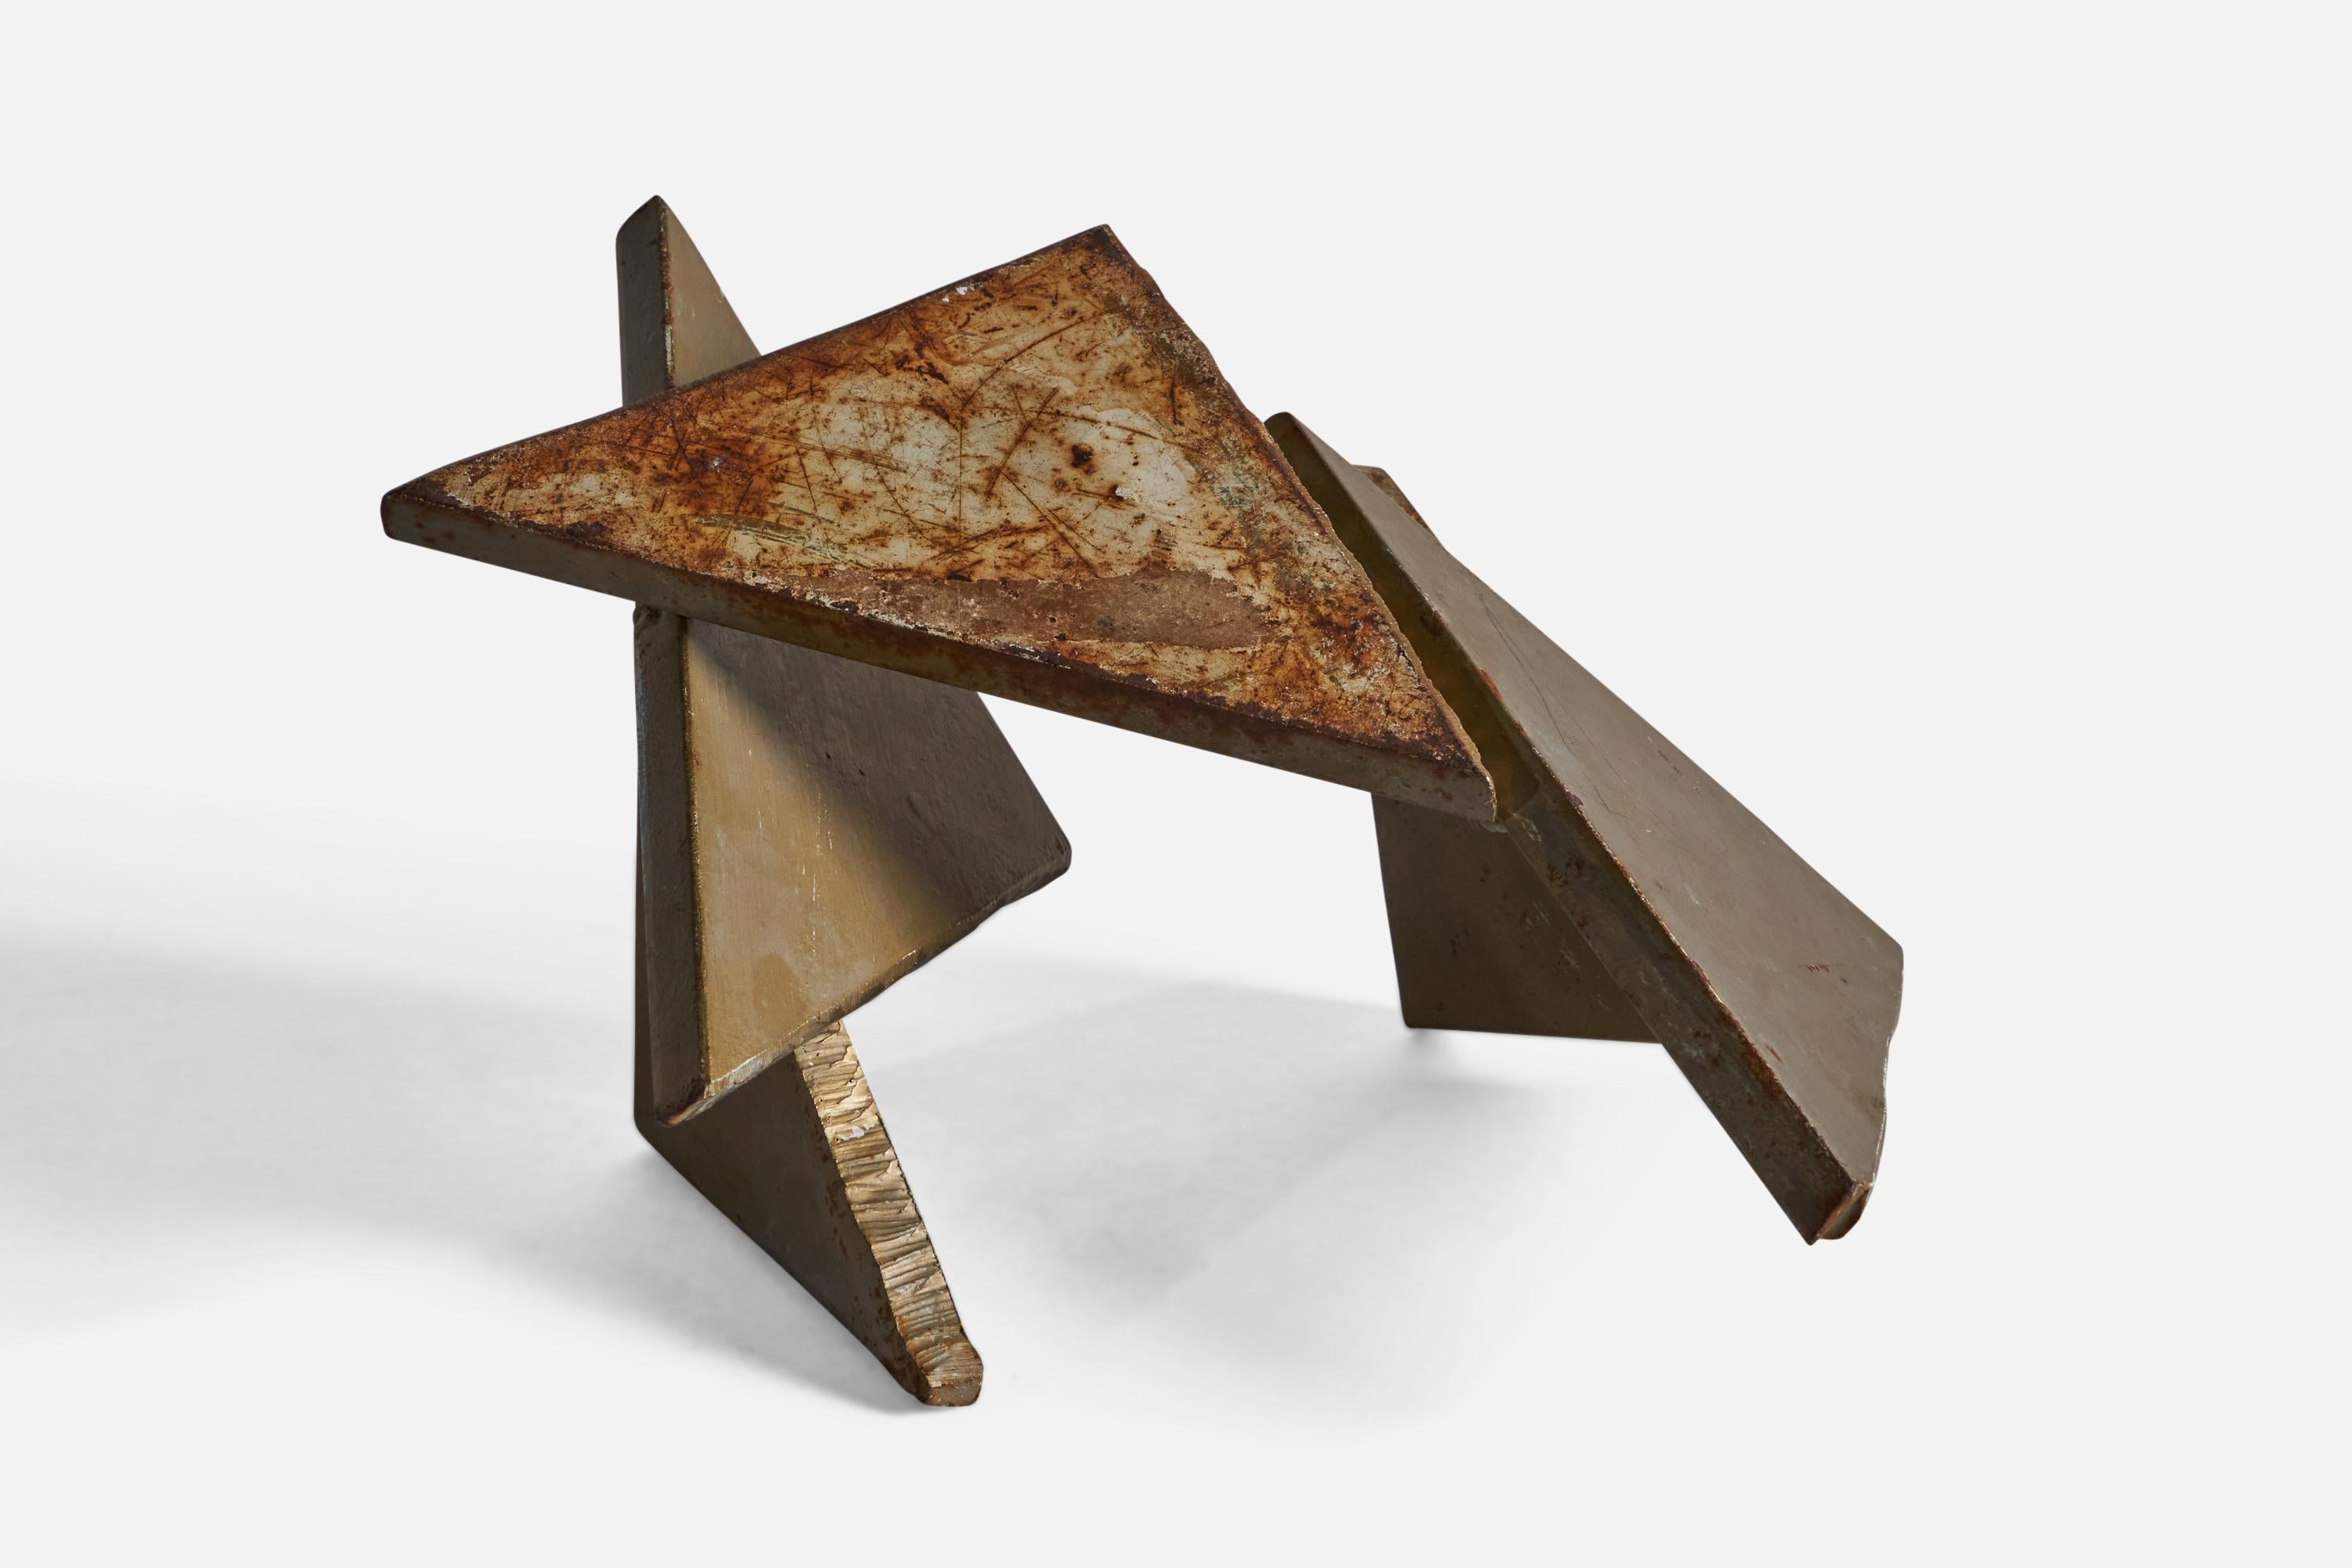 An abstract cast metal sculpture, produced in the US, c. 1960s.